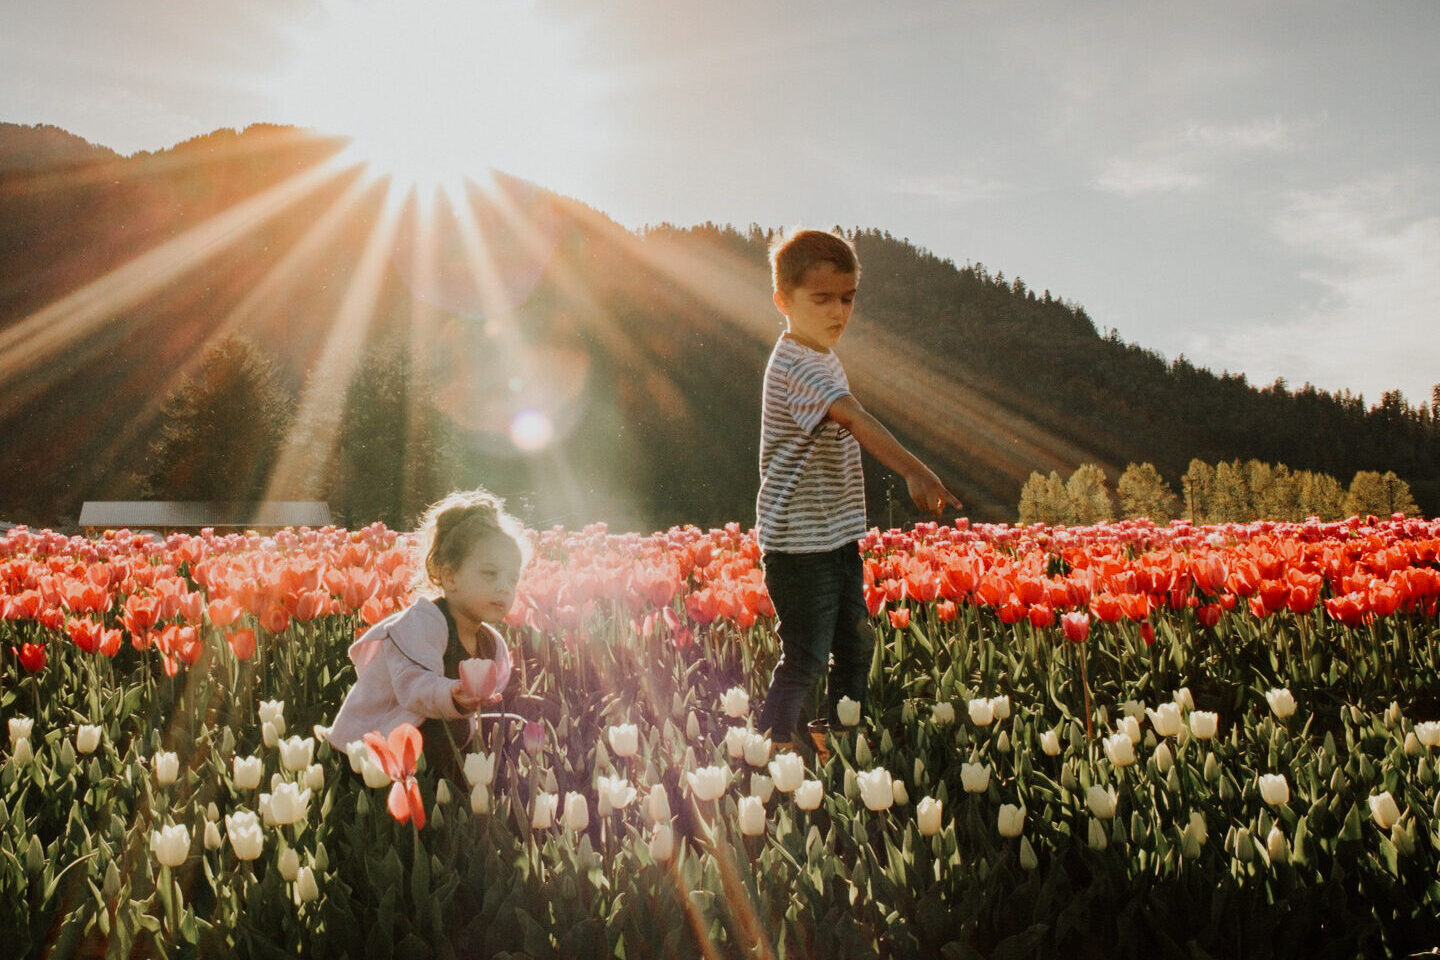 Two children playing in a field of tulips as the sun shines down on them in the background